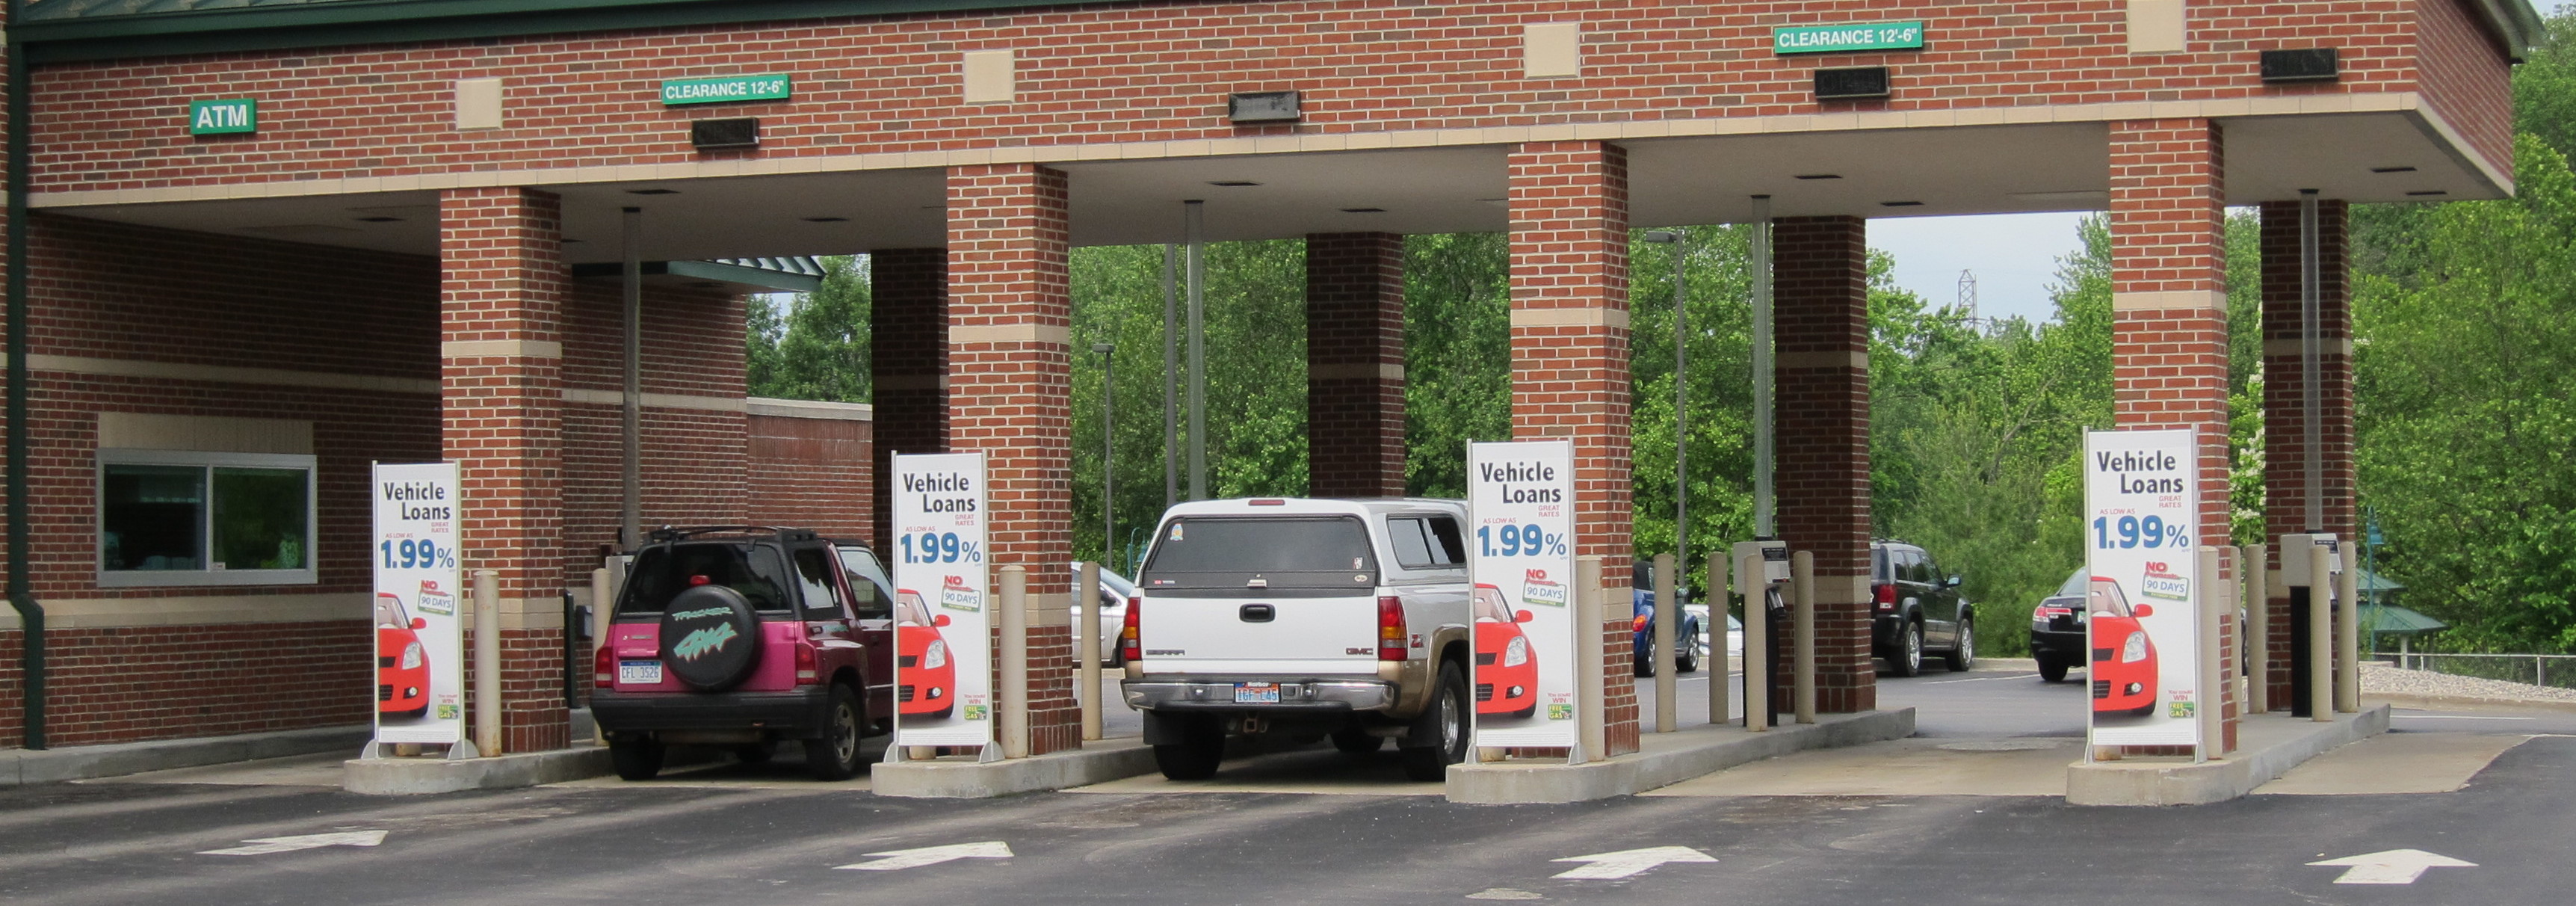 Bank drive-through lanes with promotional banners